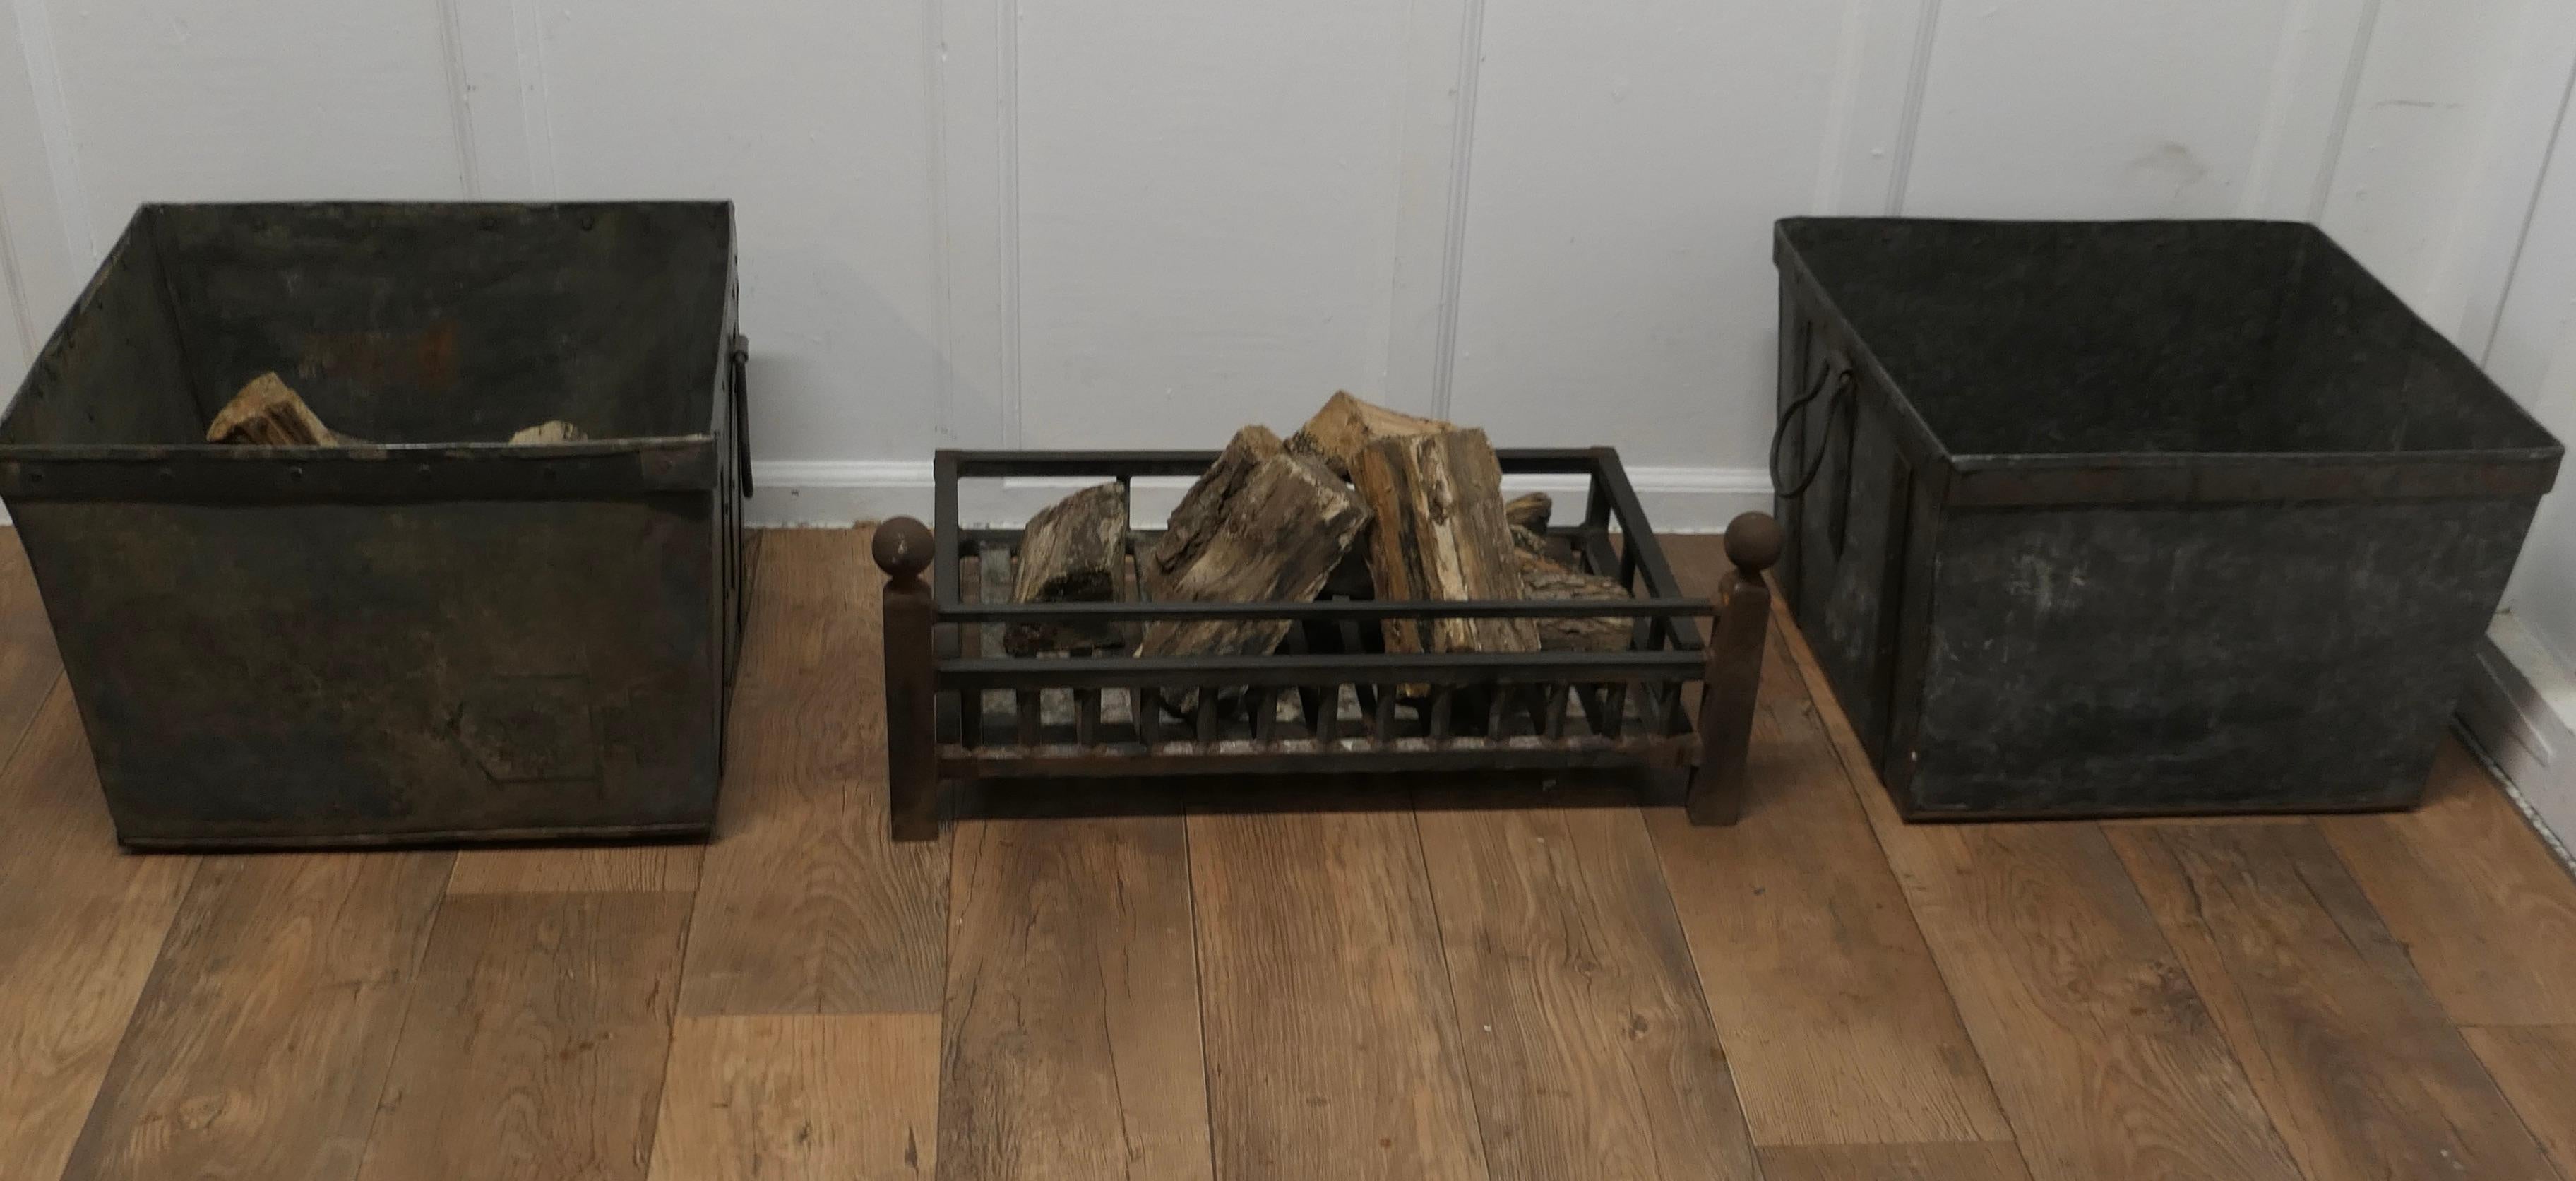 Inglenook Iron Fire Grate    The grate is made in iron with rails all around  For Sale 3